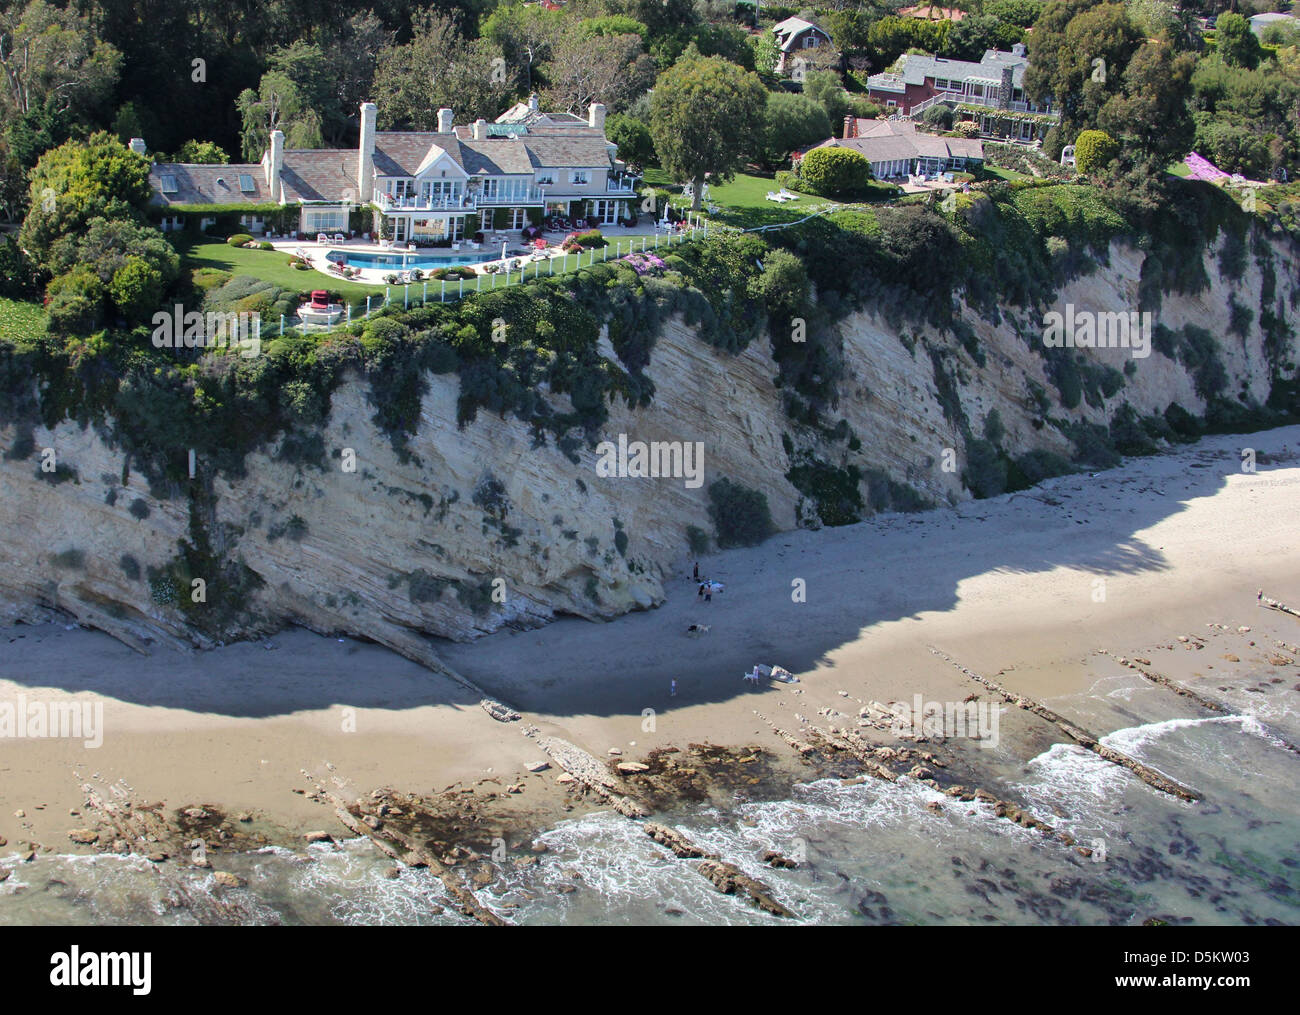 Aerial View Of Barbra Streisand S Home In Malibu Los Angeles Stock Photo Alamy,Door Knobs For French Doors